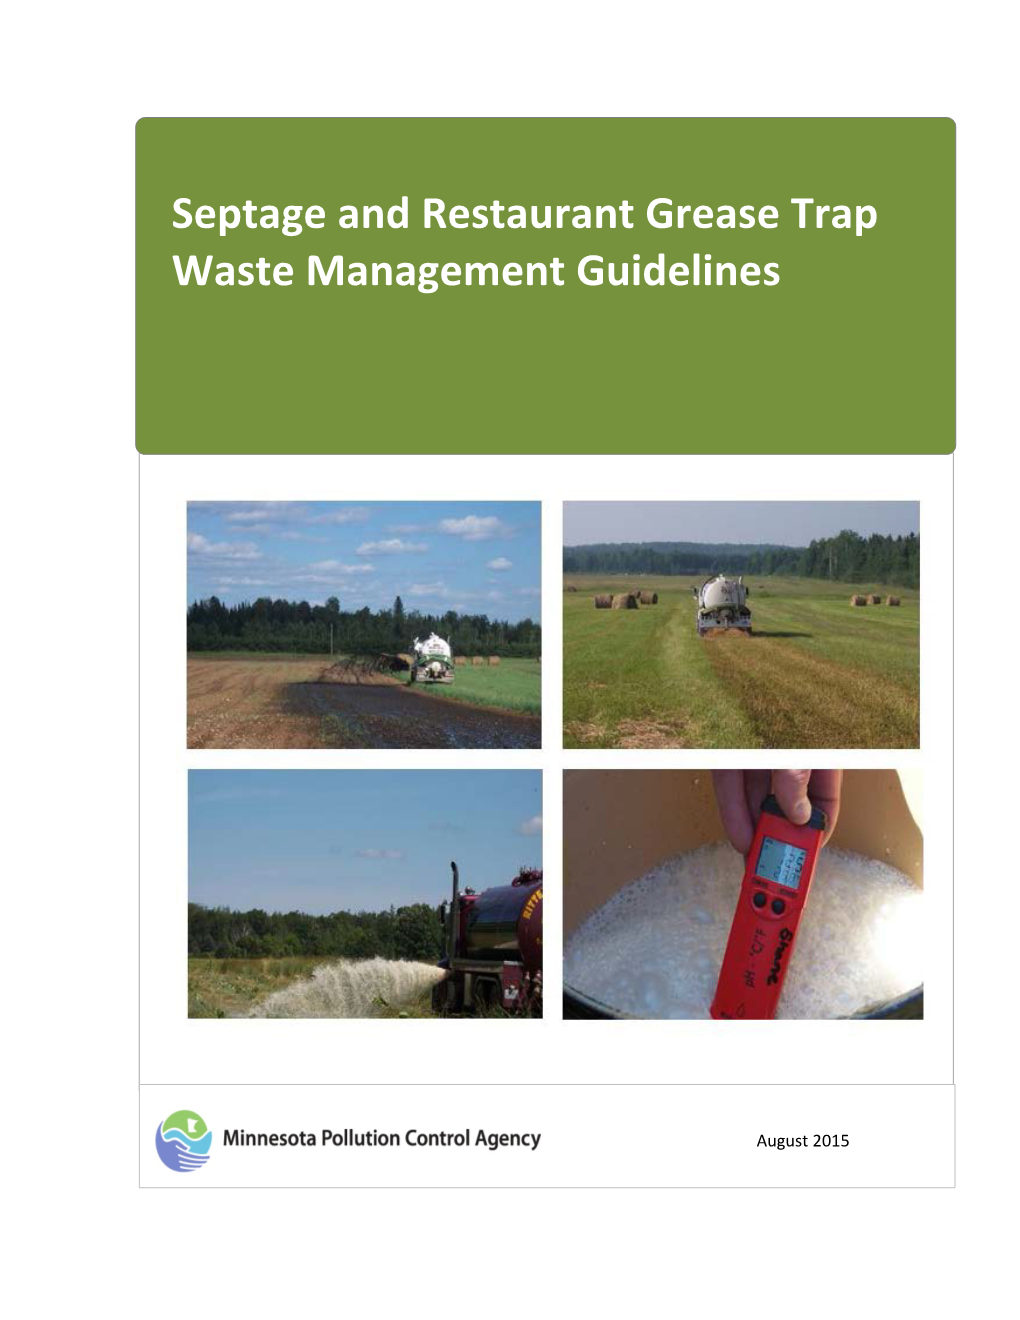 Septage and Restaurant Grease Trap Waste Management Guidelines